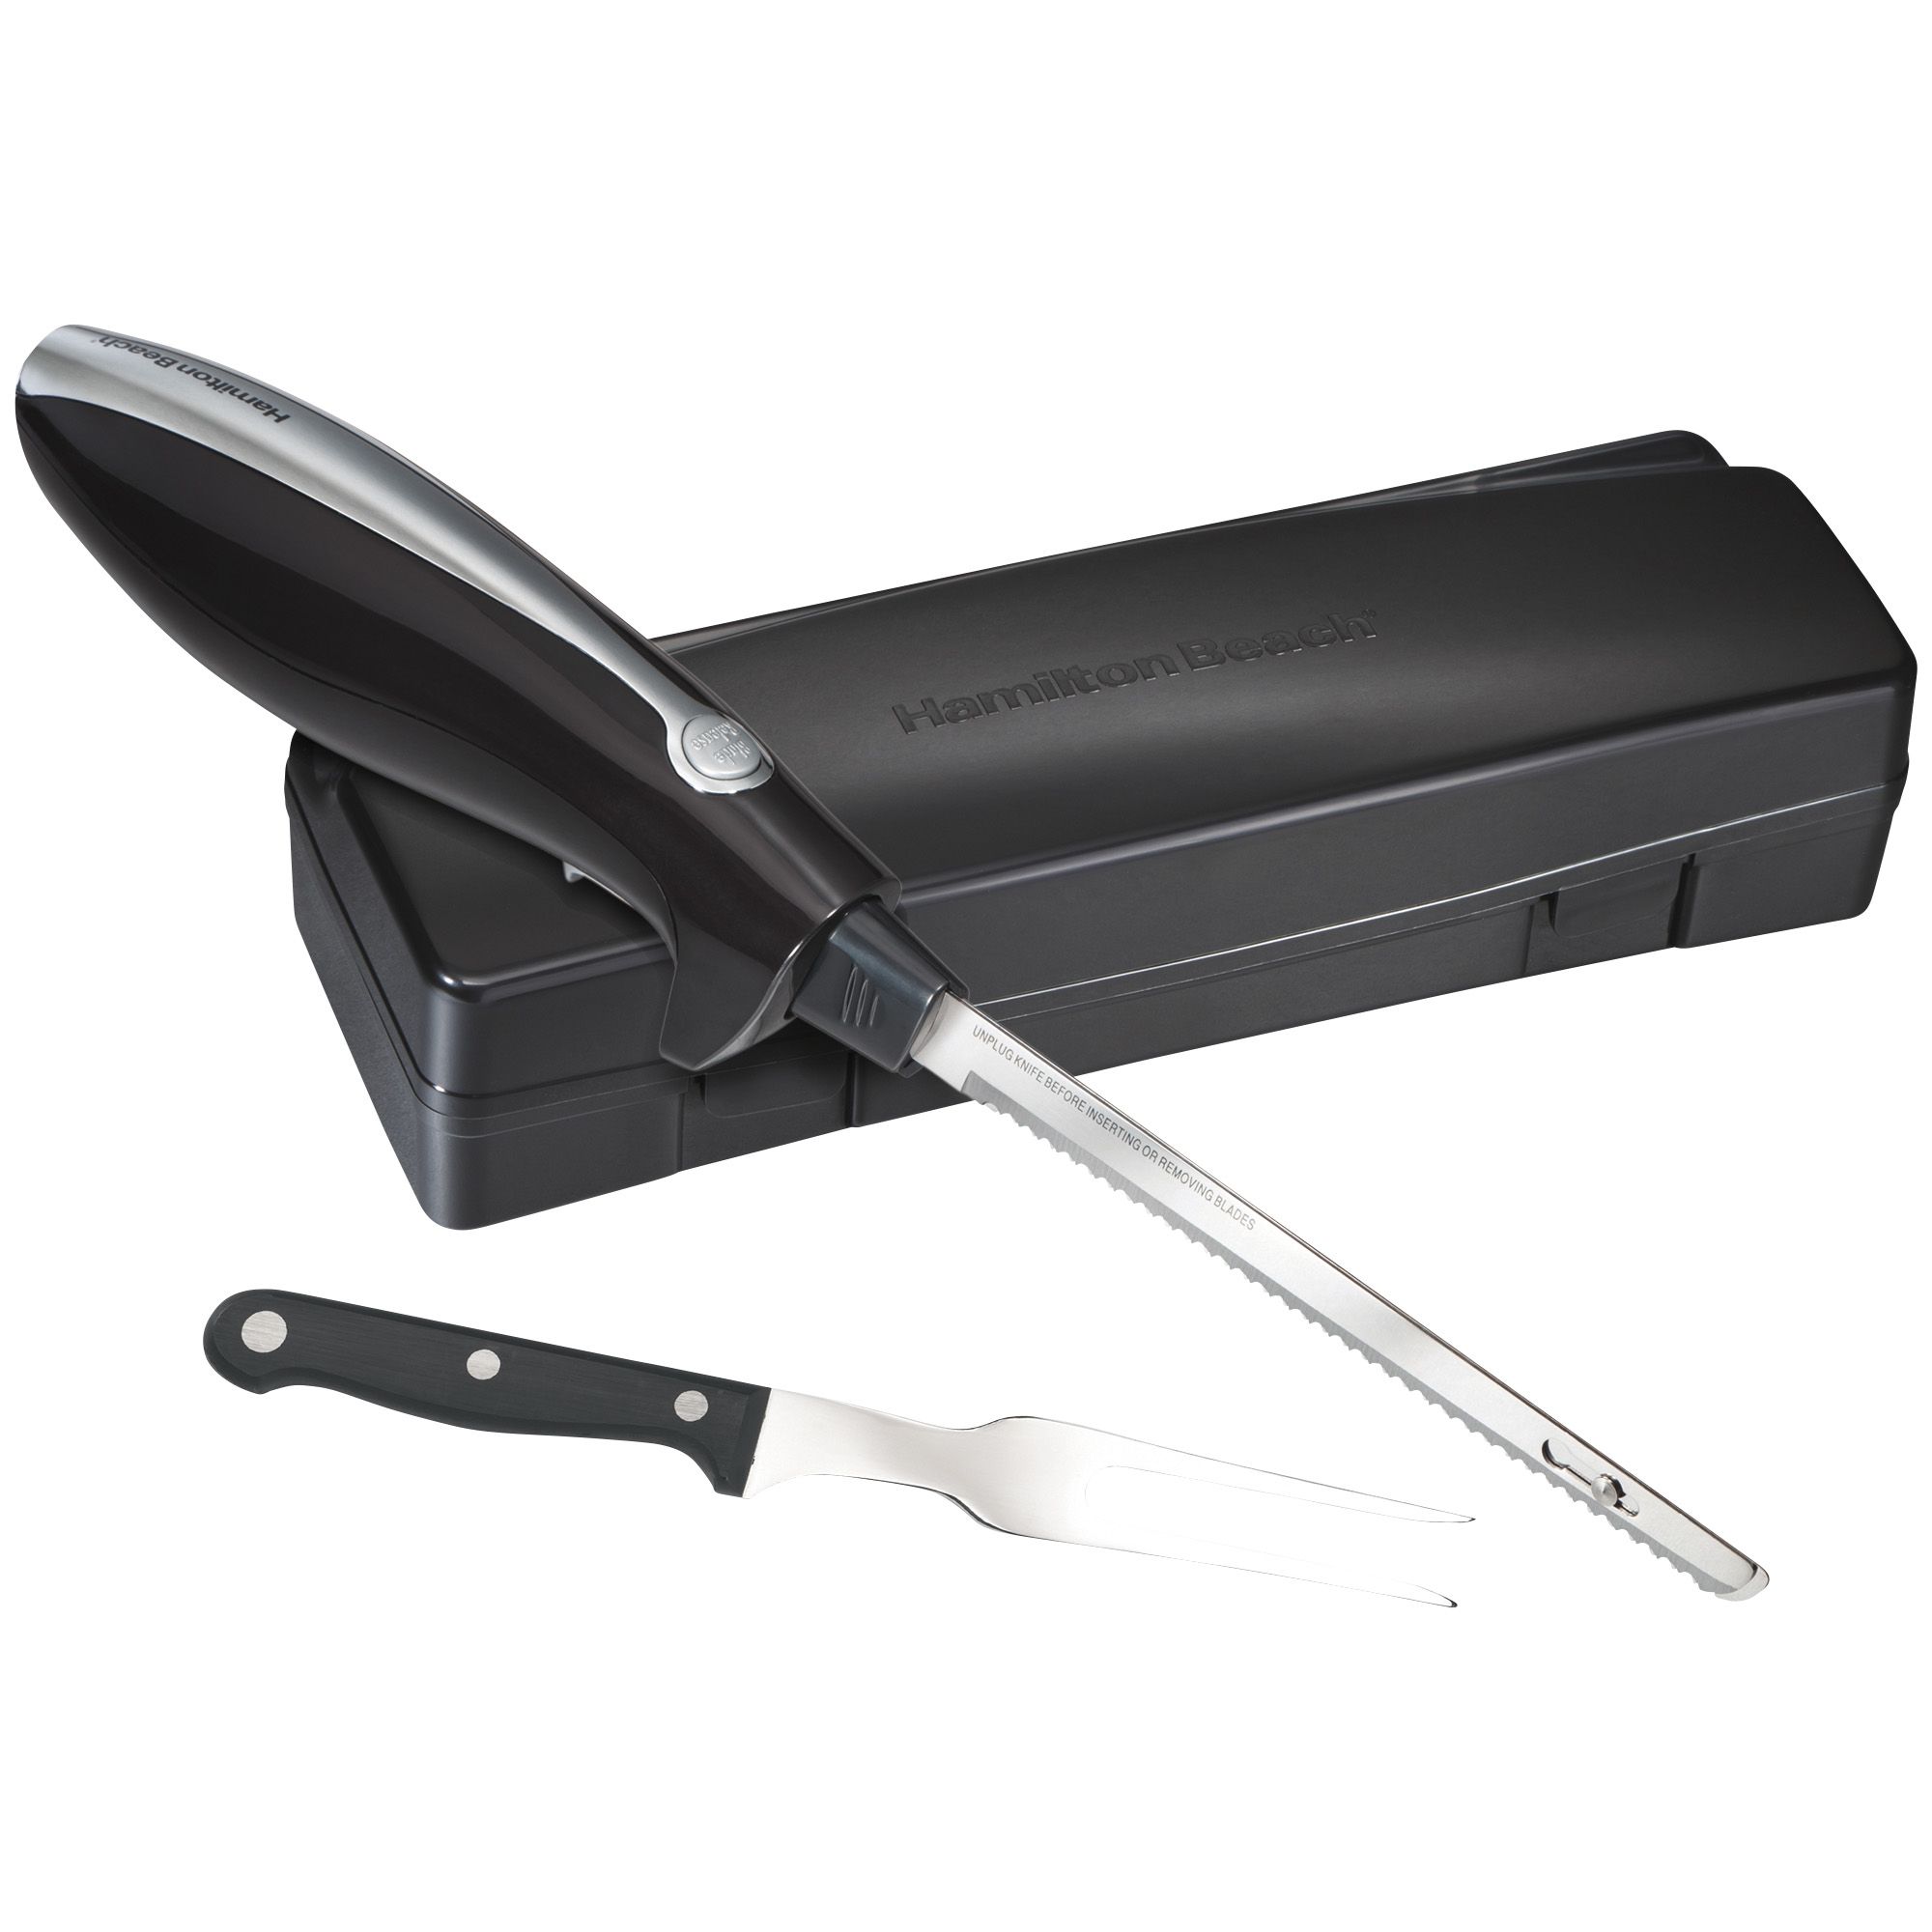 Classic Cuisine Electric Carving Knife Set with 2 Stainless Steel Blades